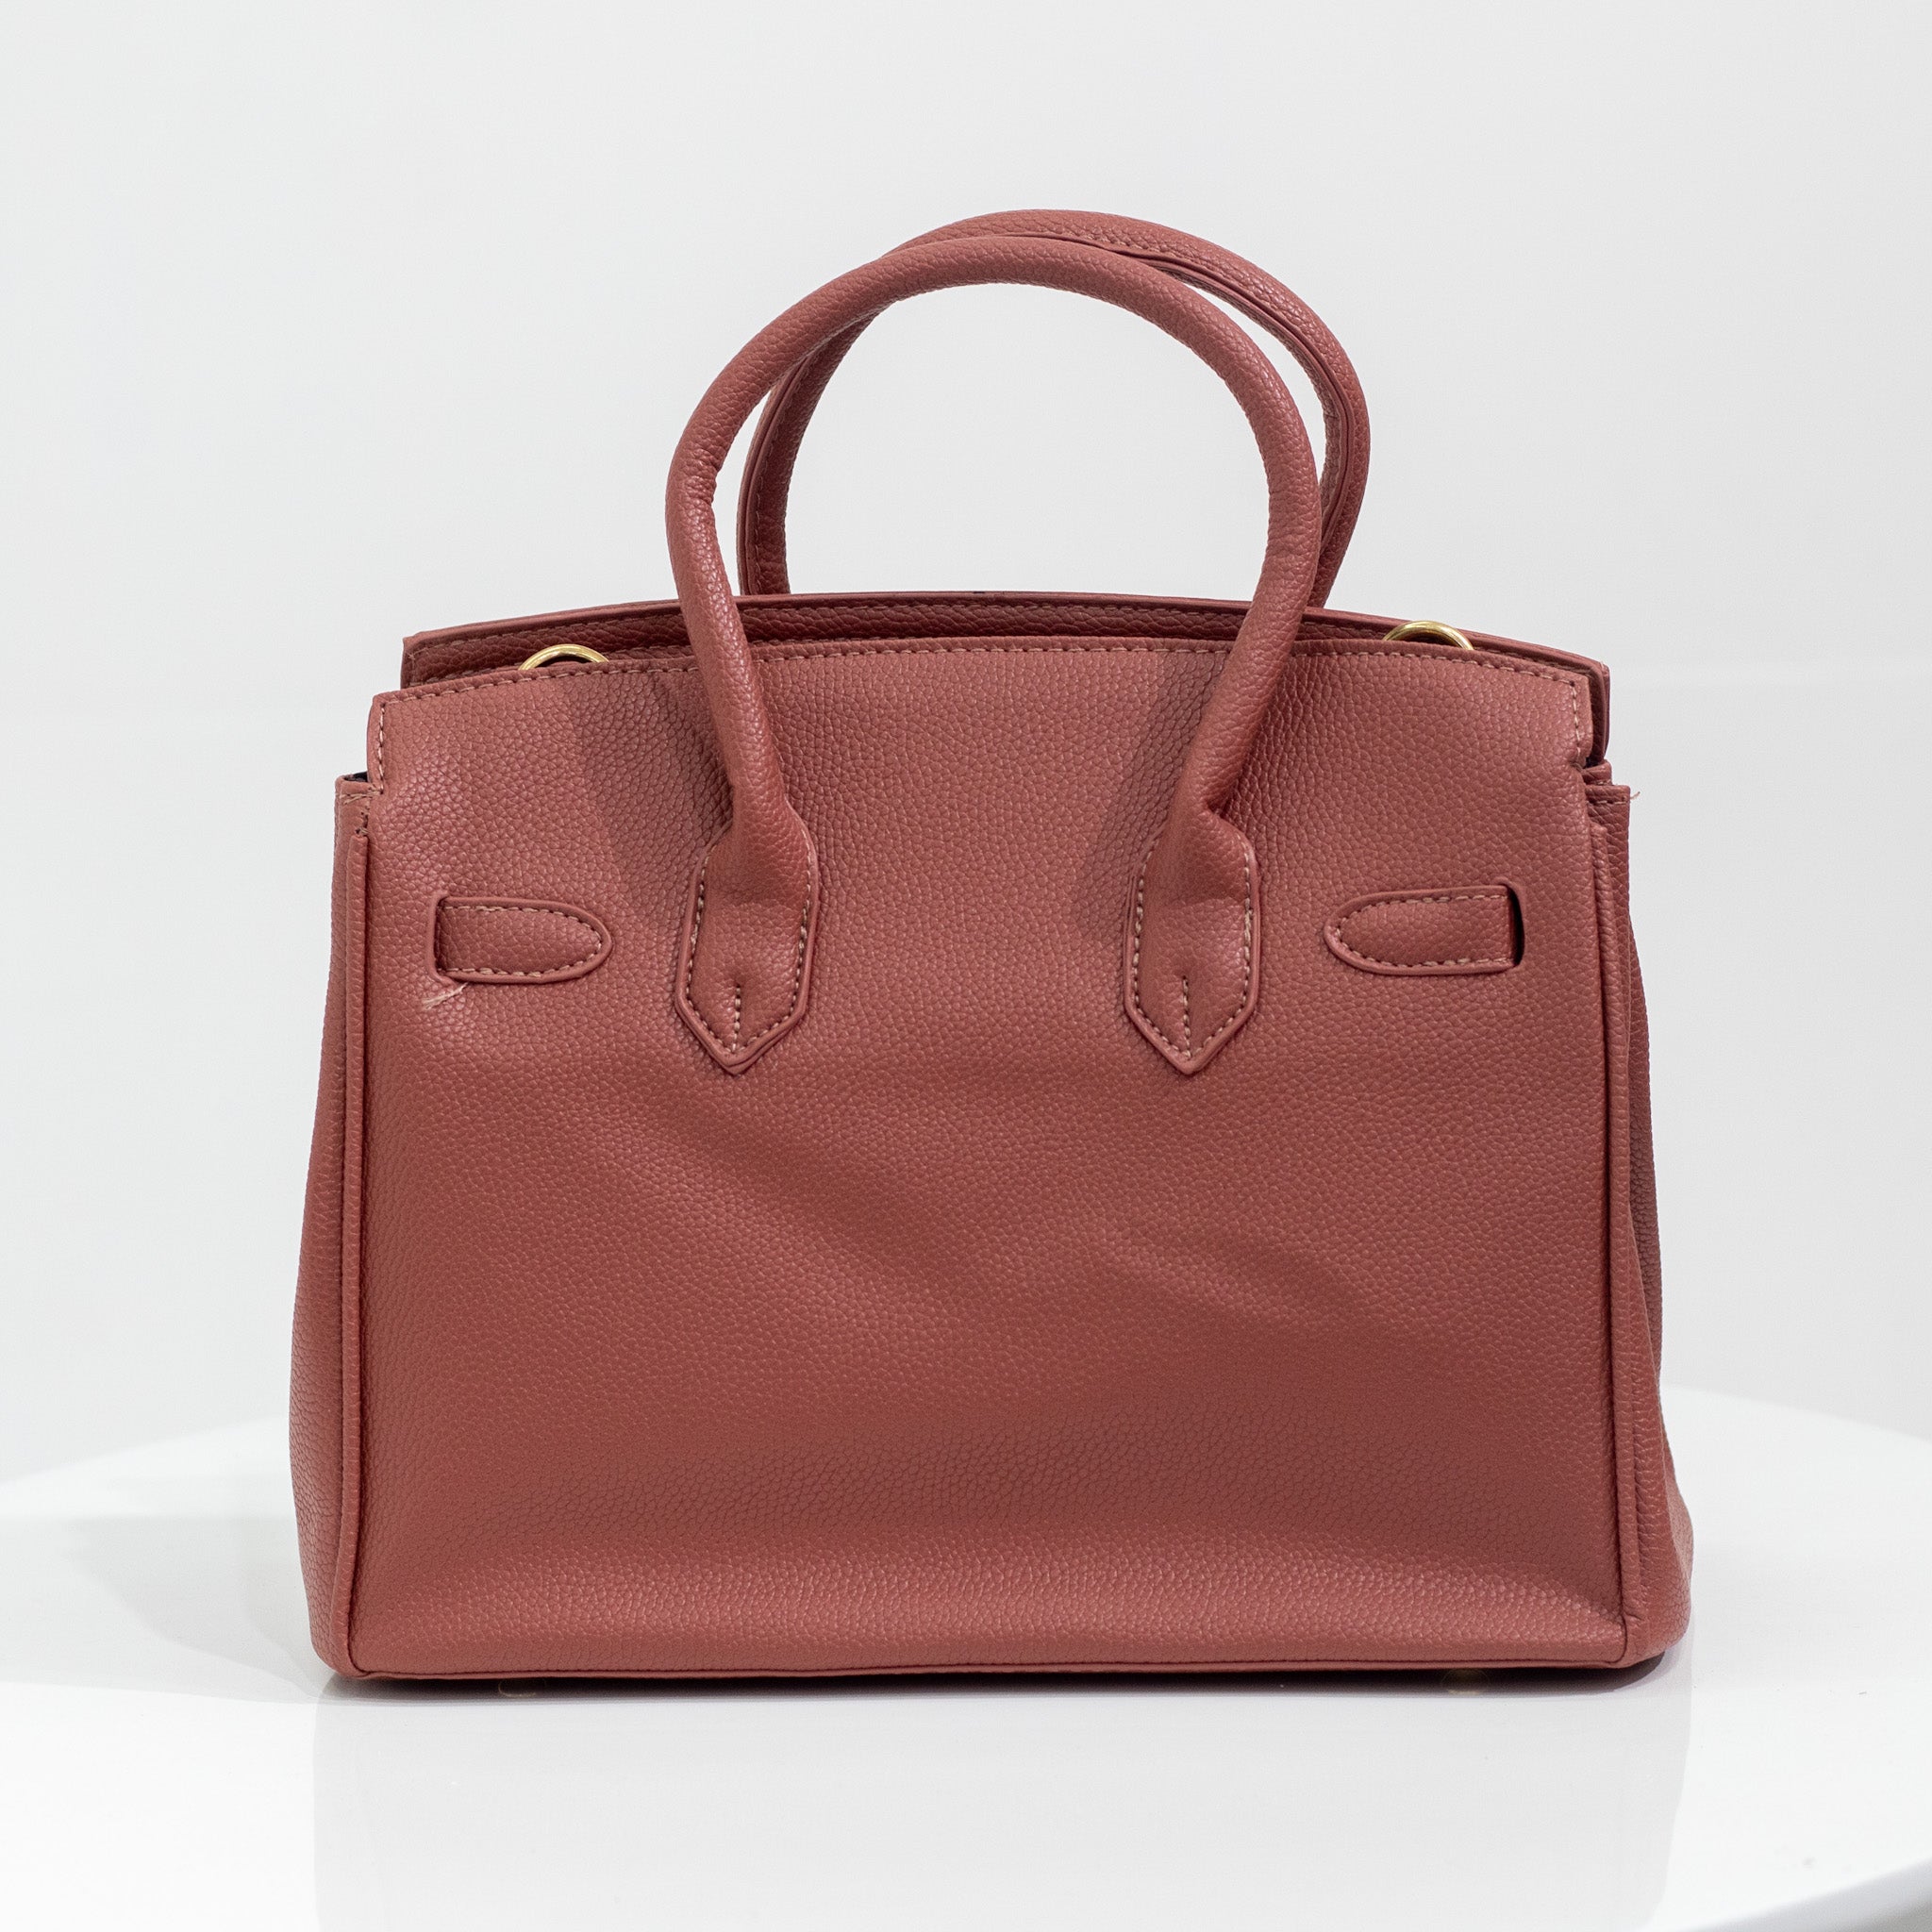 Blush faux leather hand bag quincy